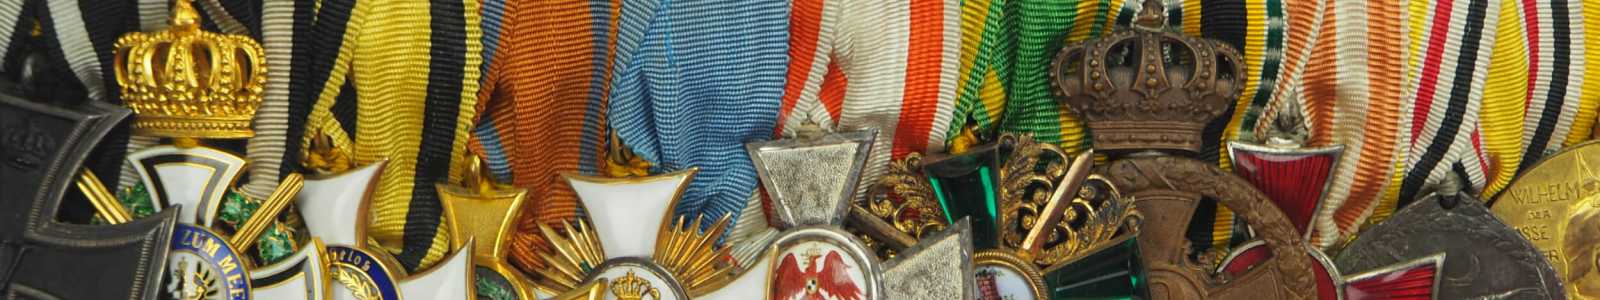 30th auction: Militaria, medals and decorations